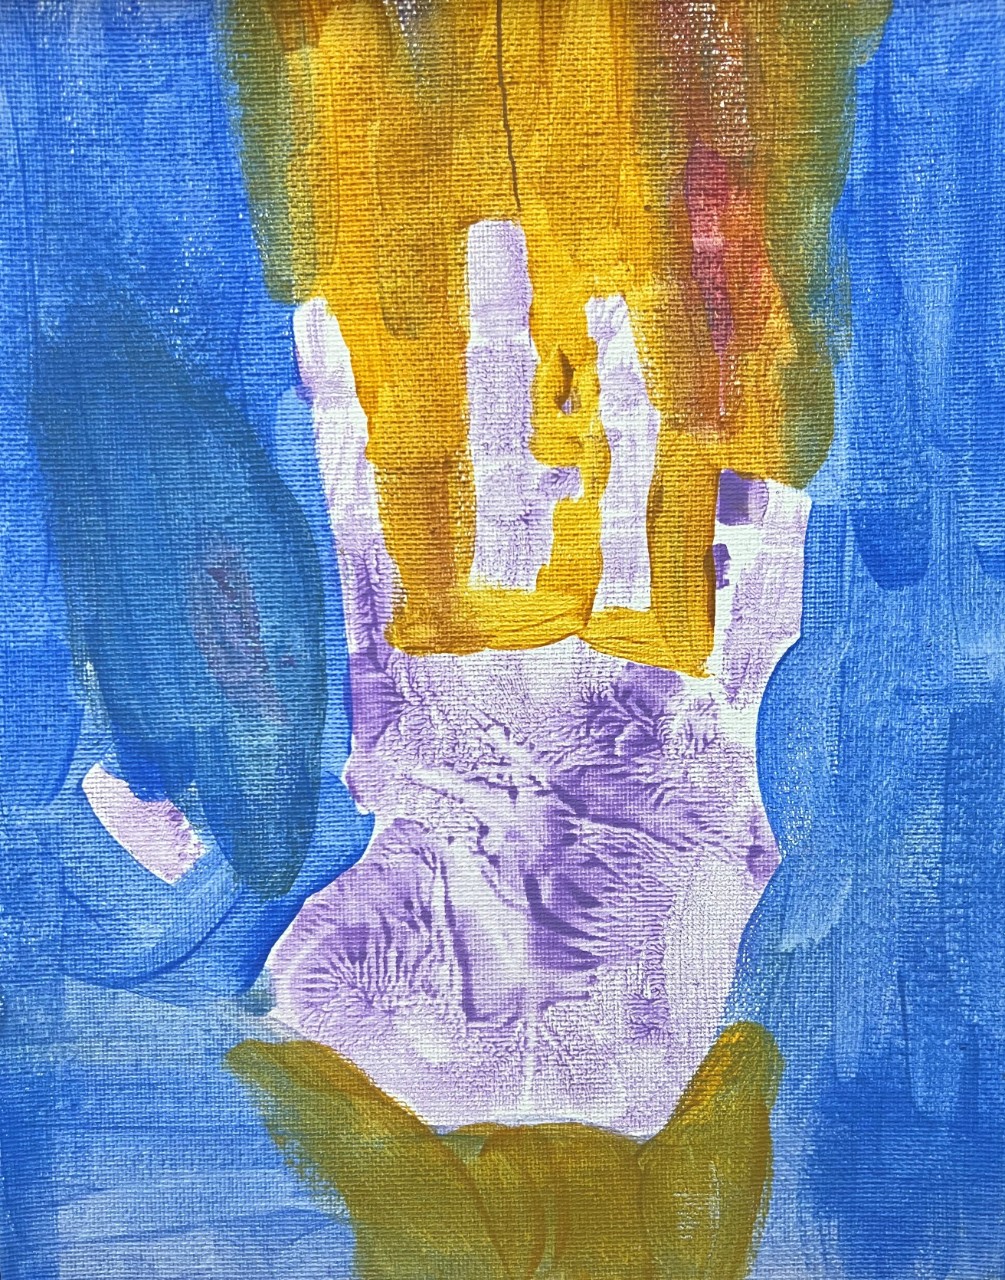 A purple and white handprint features prominently at the center of a vertical, rectangular image. Behind the handprint, a wide band of golden yellow with subtle red tones extends vertically the length of the canvas. A bright blue background fills the rest of the canvas, to the left and right. Wide brush strokes are visible in the background of blue and yellow. 